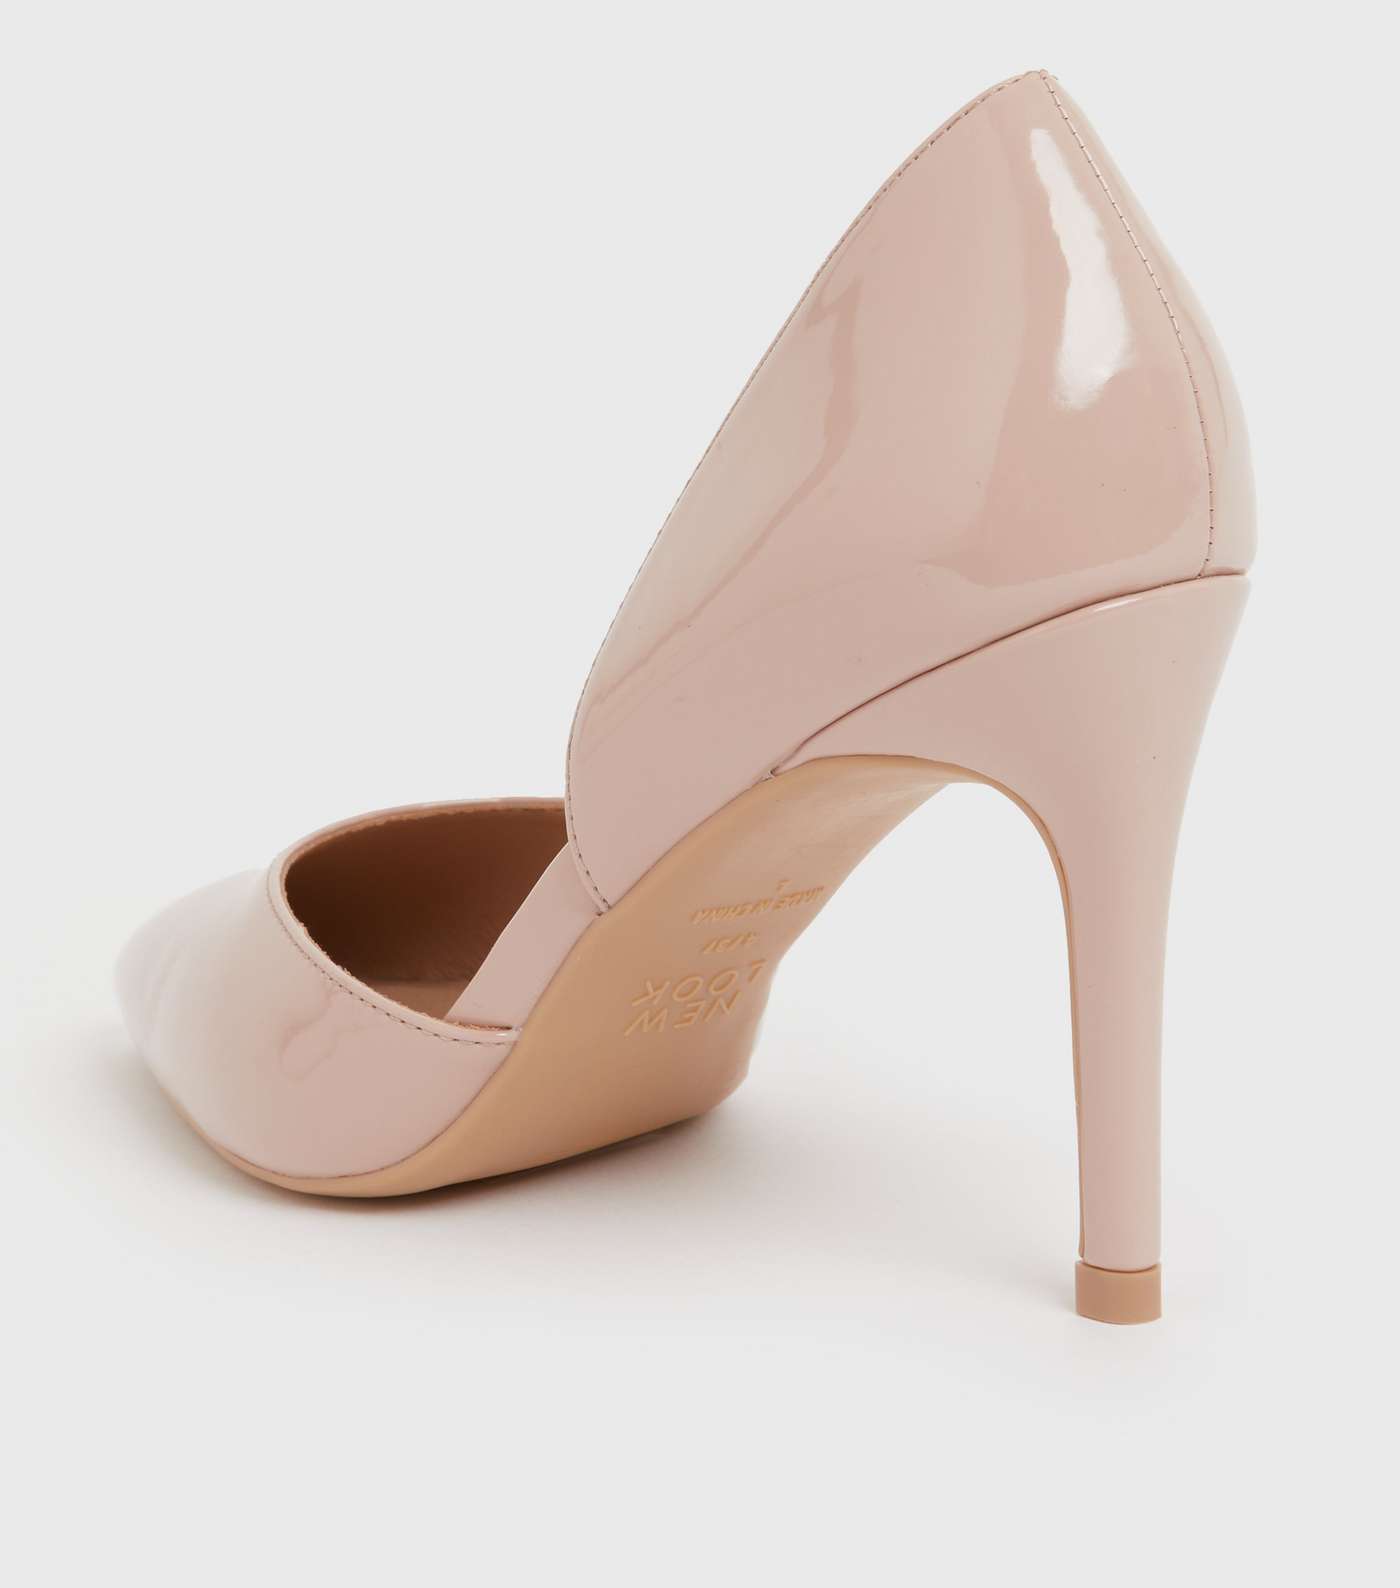 Cream Patent Pointed Stiletto Heel Court Shoes Image 4